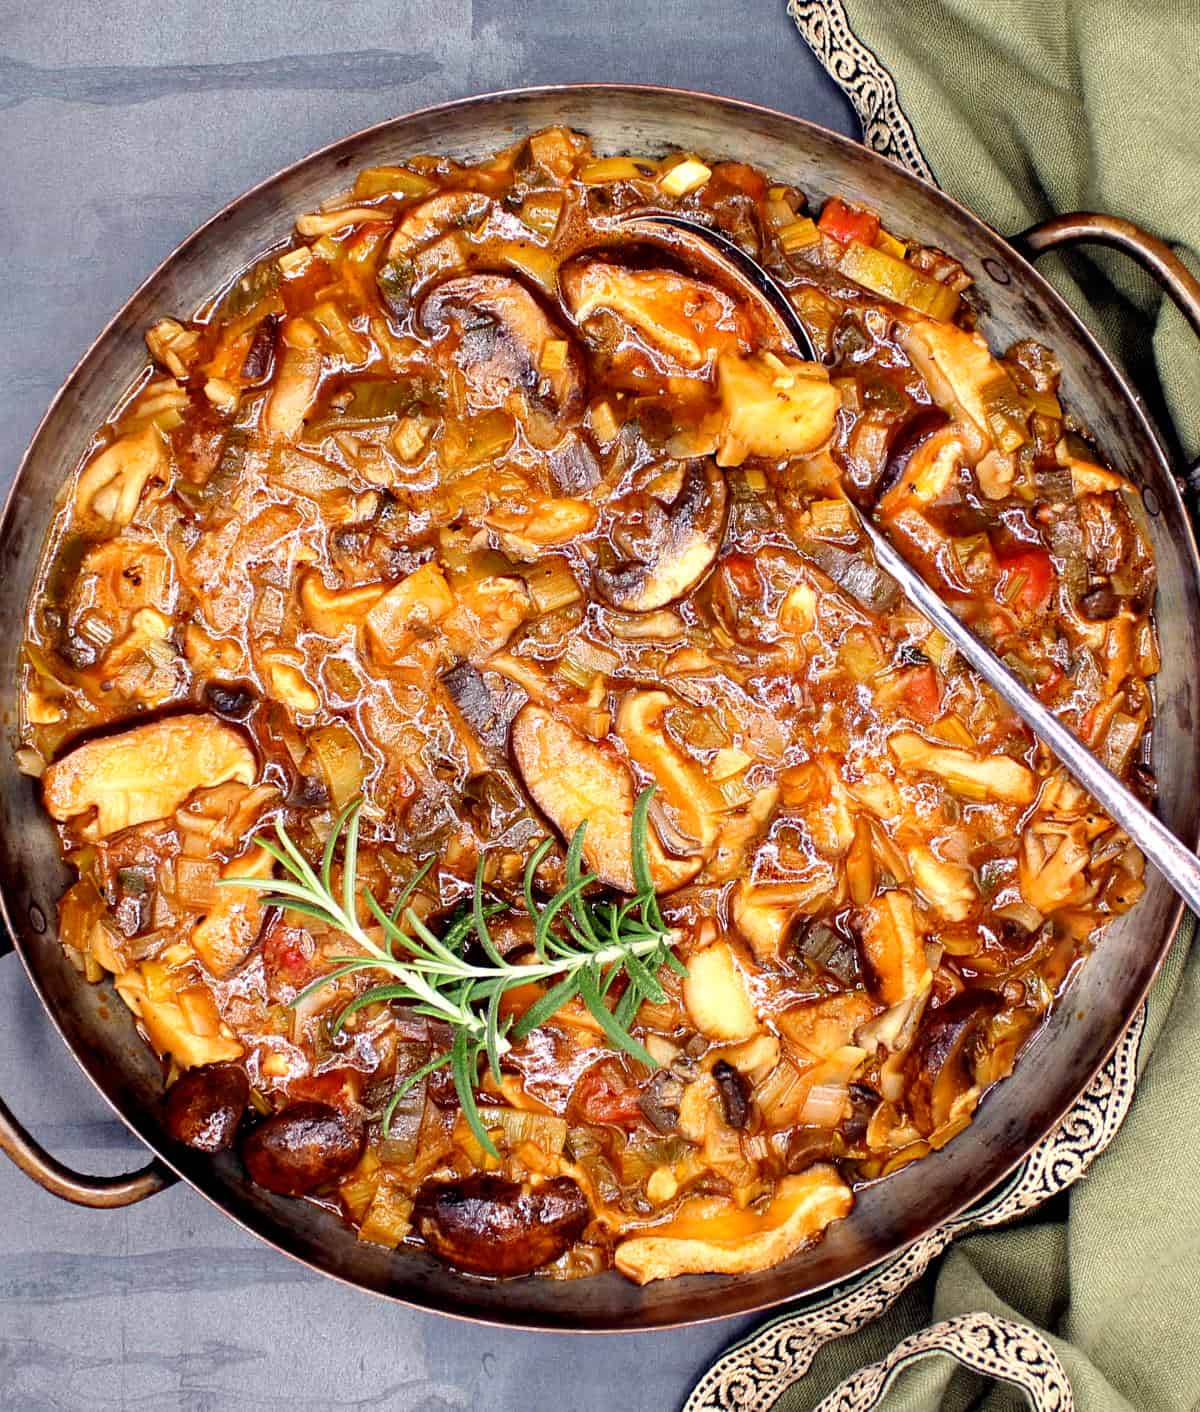 Mushroom stew in pan with rosemary sprigs and spoon.